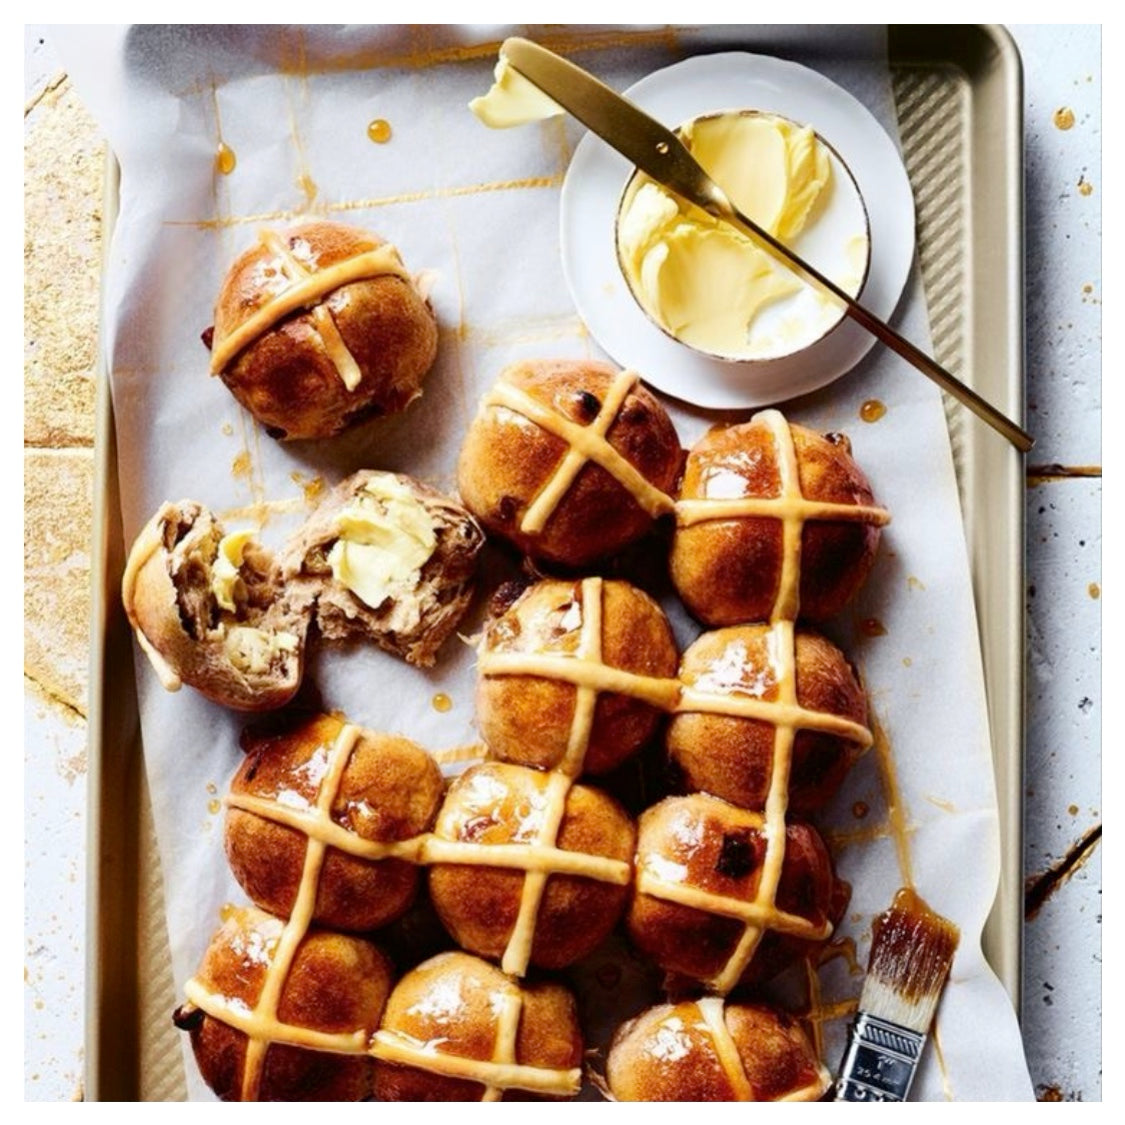 O'Donnells Bakehouse - Hot Cross Buns - Chocolate